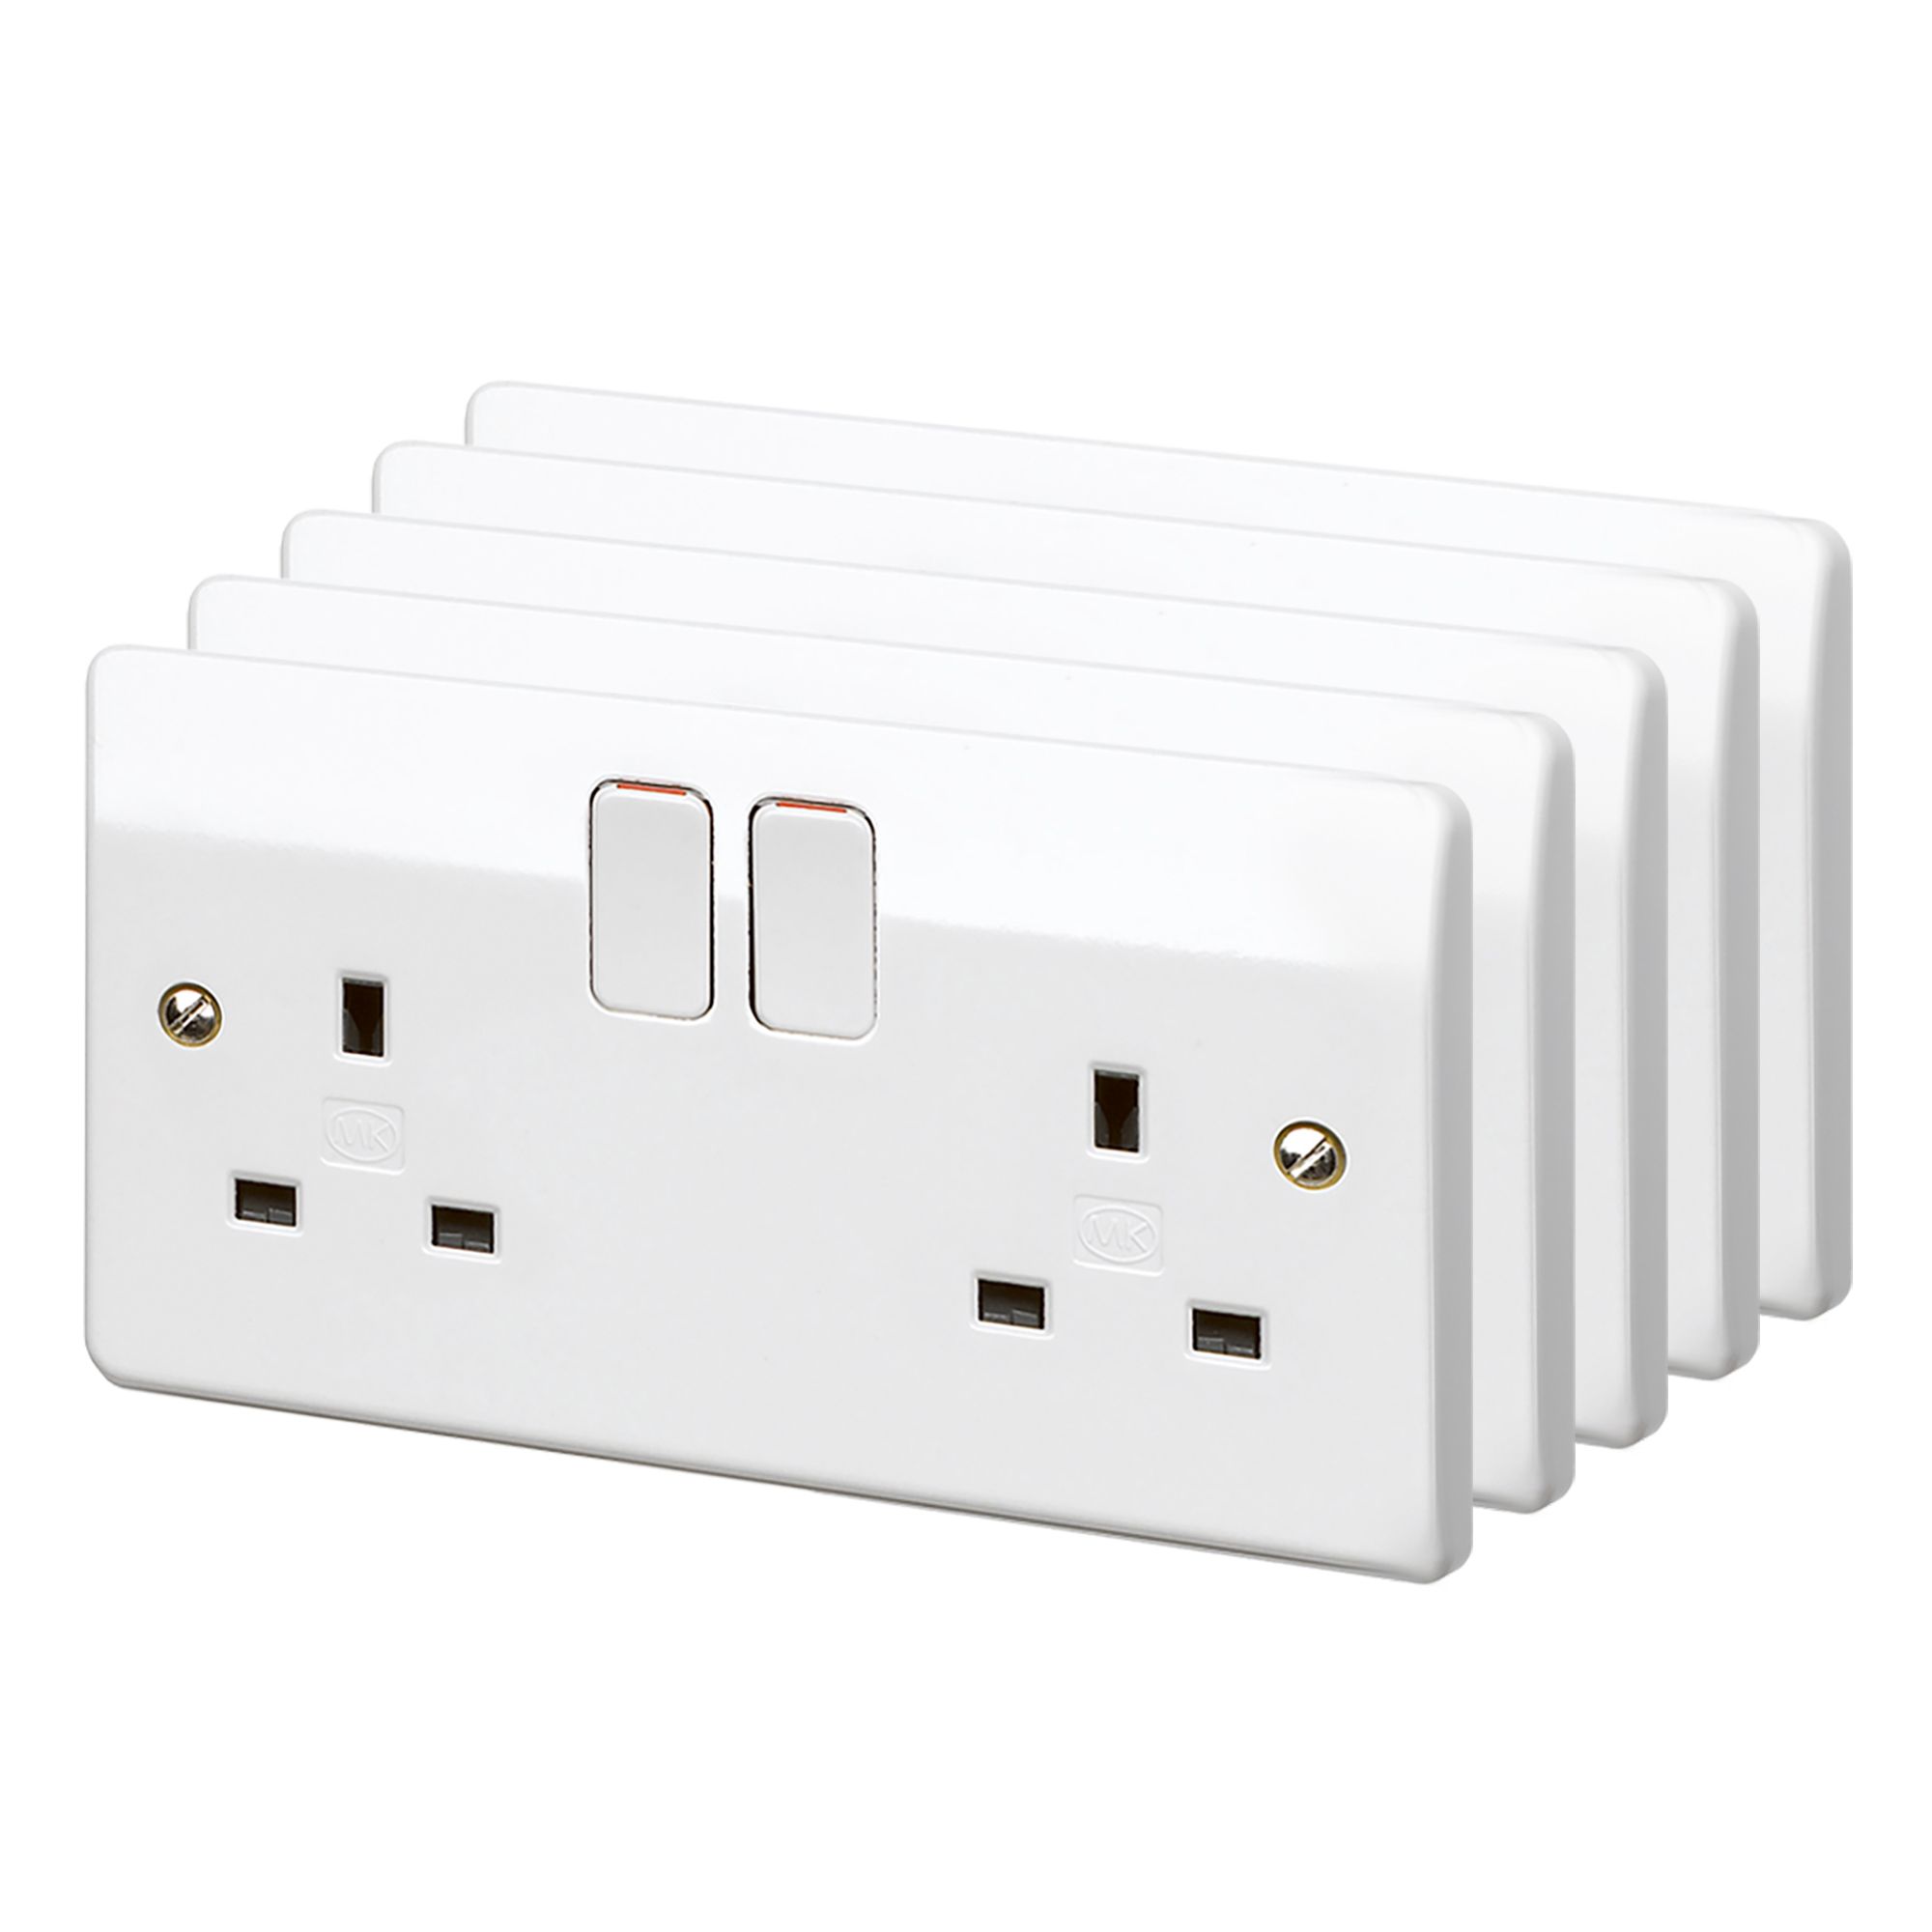 MK White Double 13A Switched Socket, Pack of 5